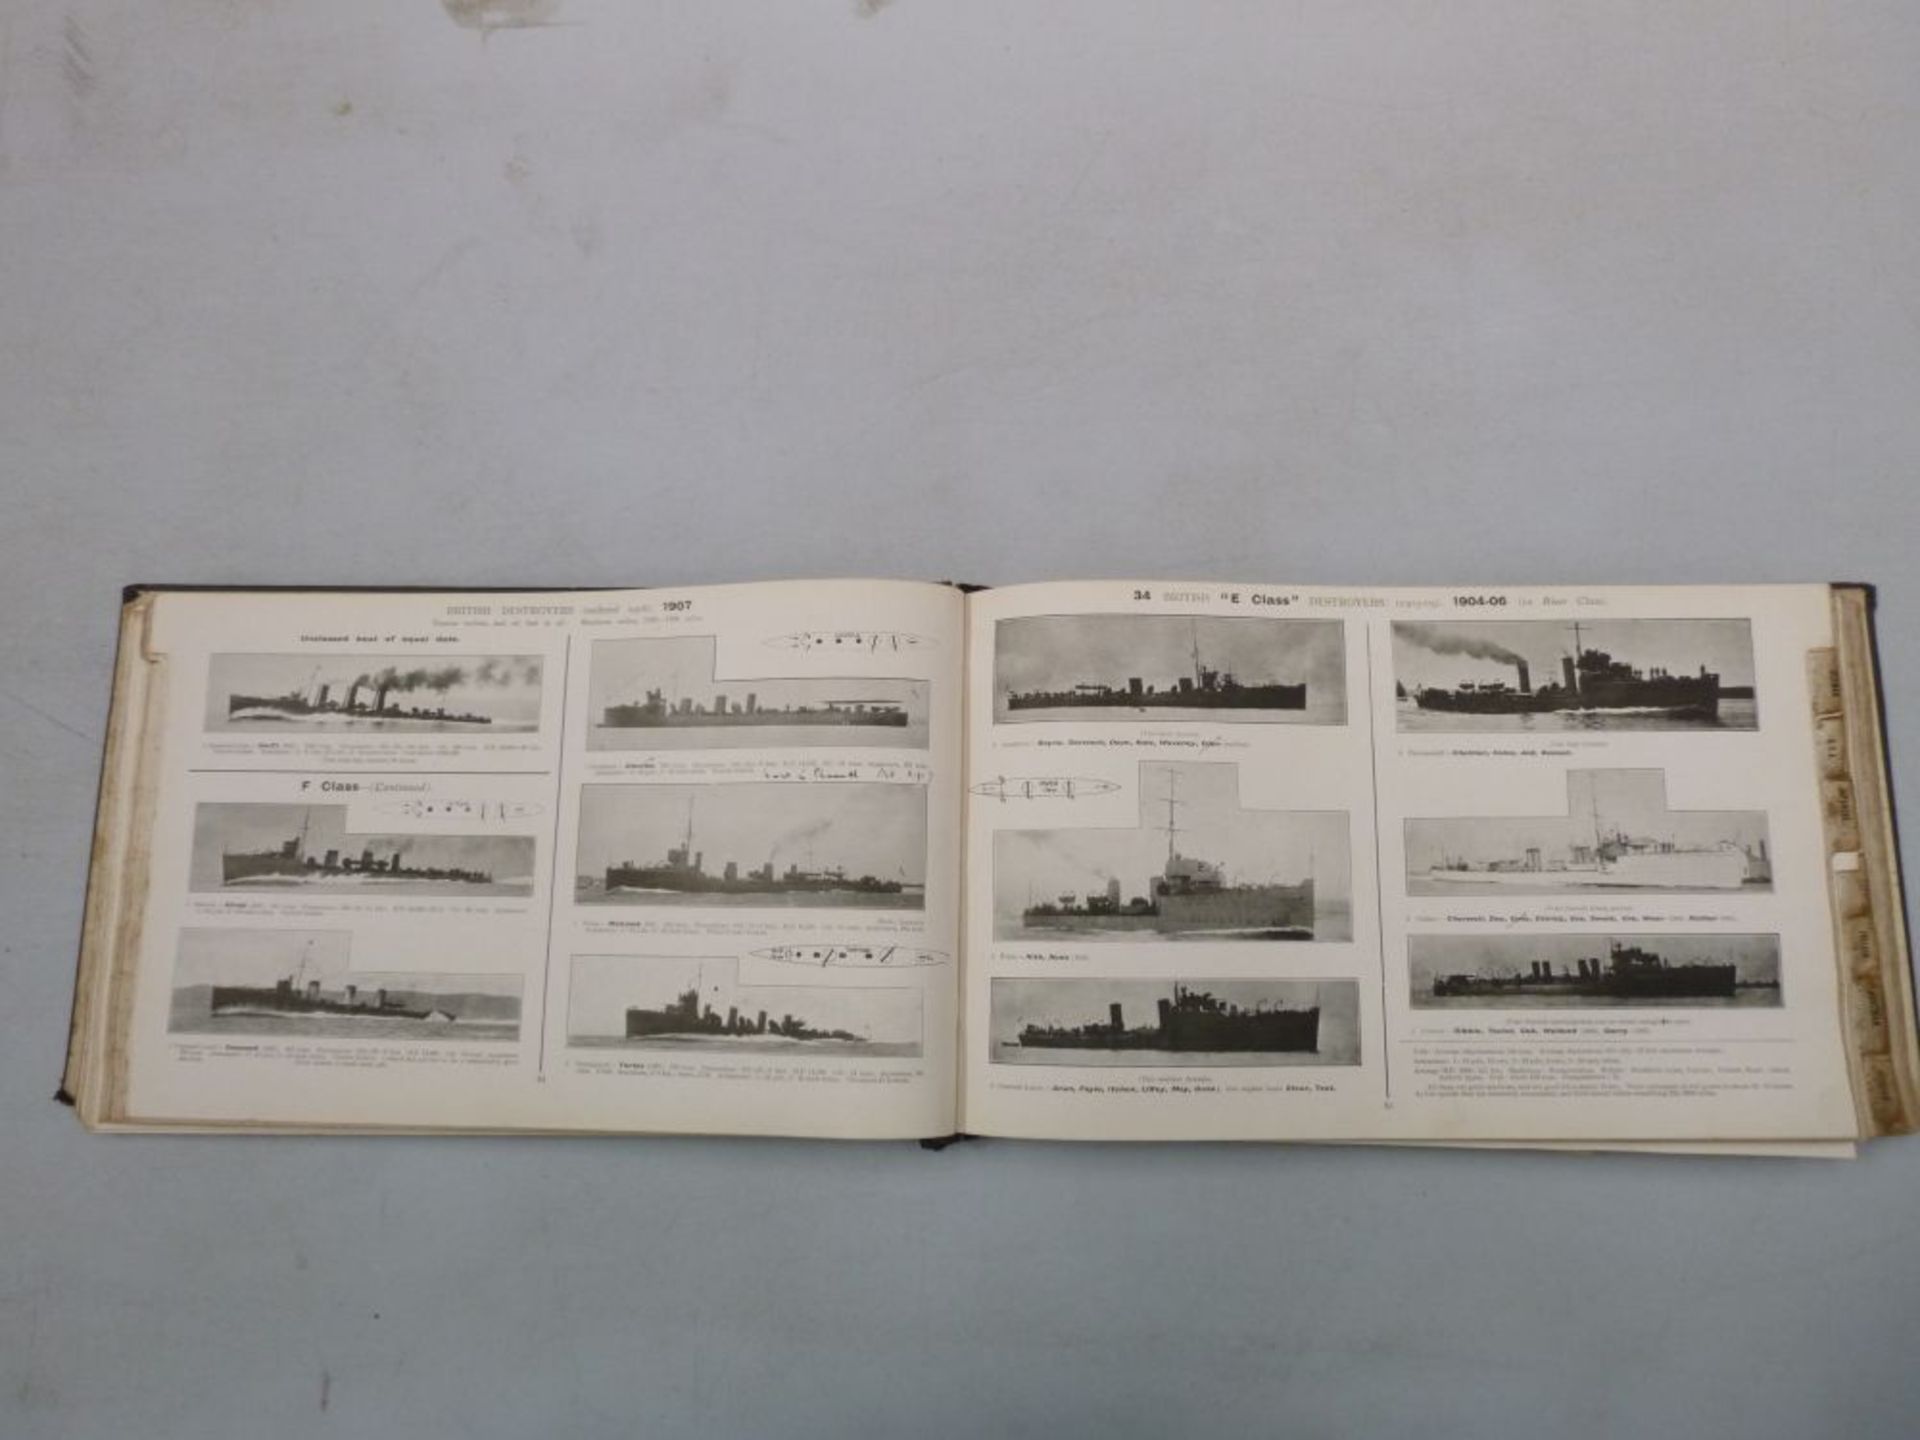 'Jane's Fighting Ships' - one volume 1914 (est. £20-£40) - Image 3 of 4